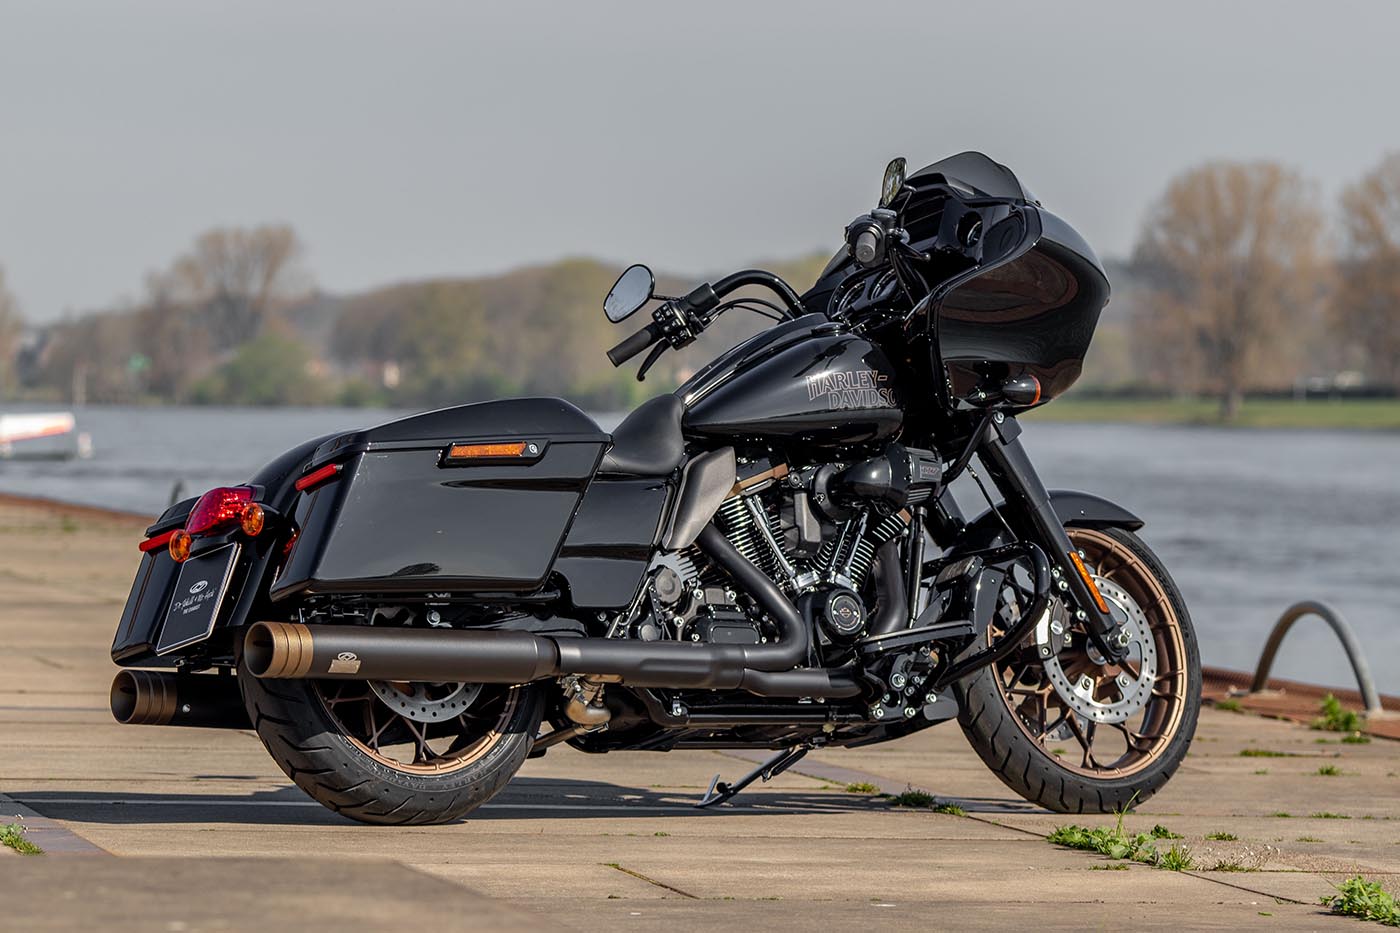 The Harley-Davidson Road Glide with a Exhaust by Dr. Jekill & Mr. Hyde®